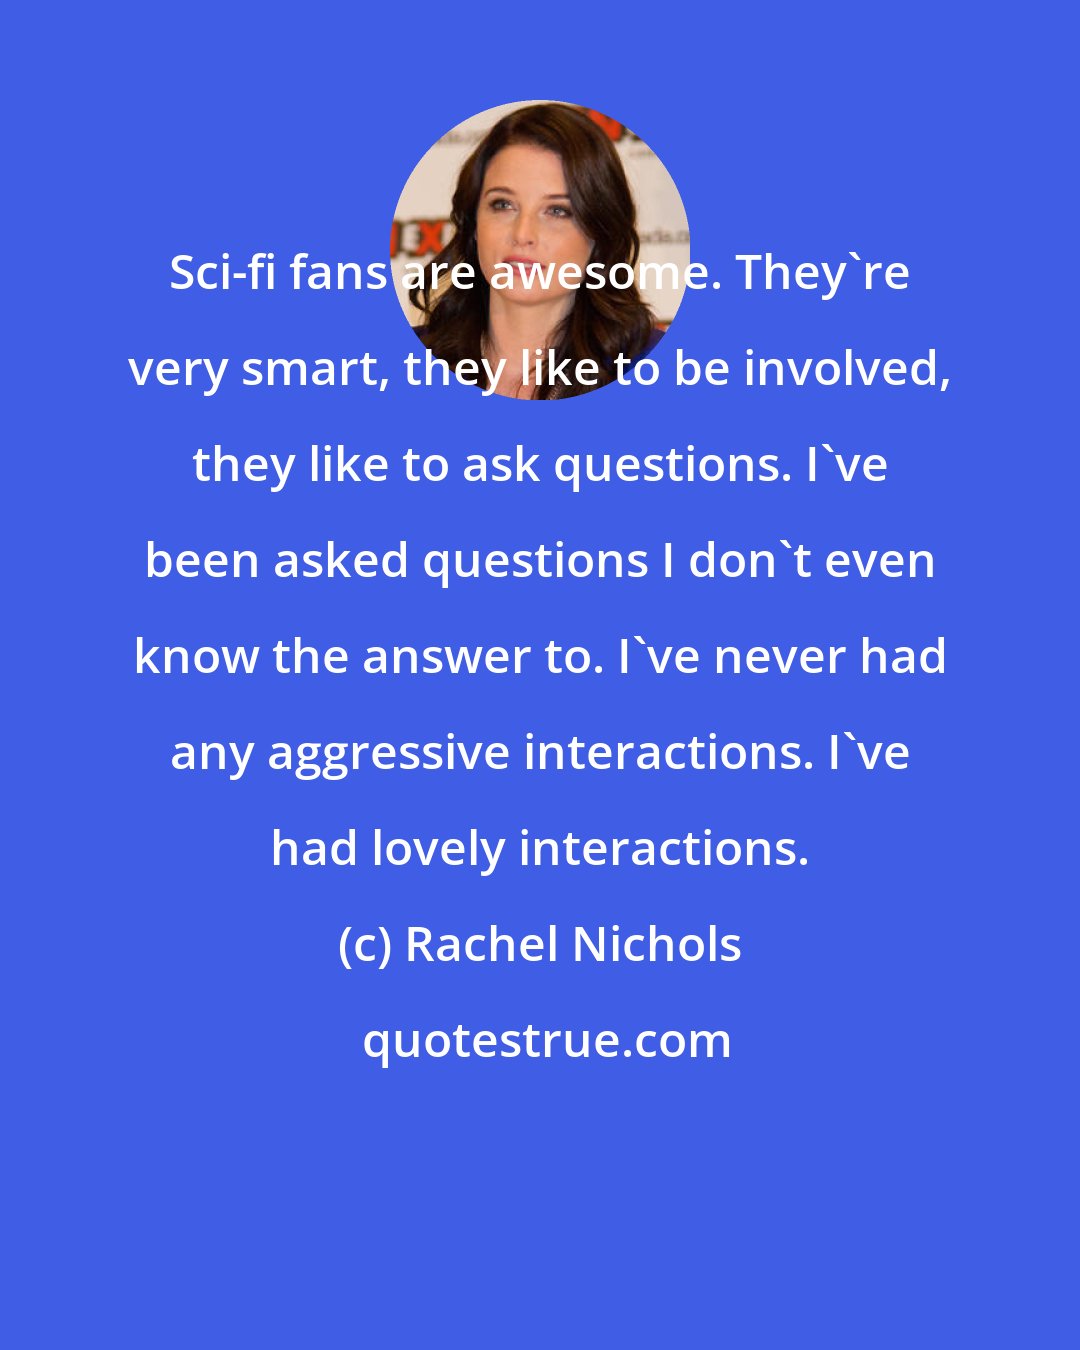 Rachel Nichols: Sci-fi fans are awesome. They're very smart, they like to be involved, they like to ask questions. I've been asked questions I don't even know the answer to. I've never had any aggressive interactions. I've had lovely interactions.